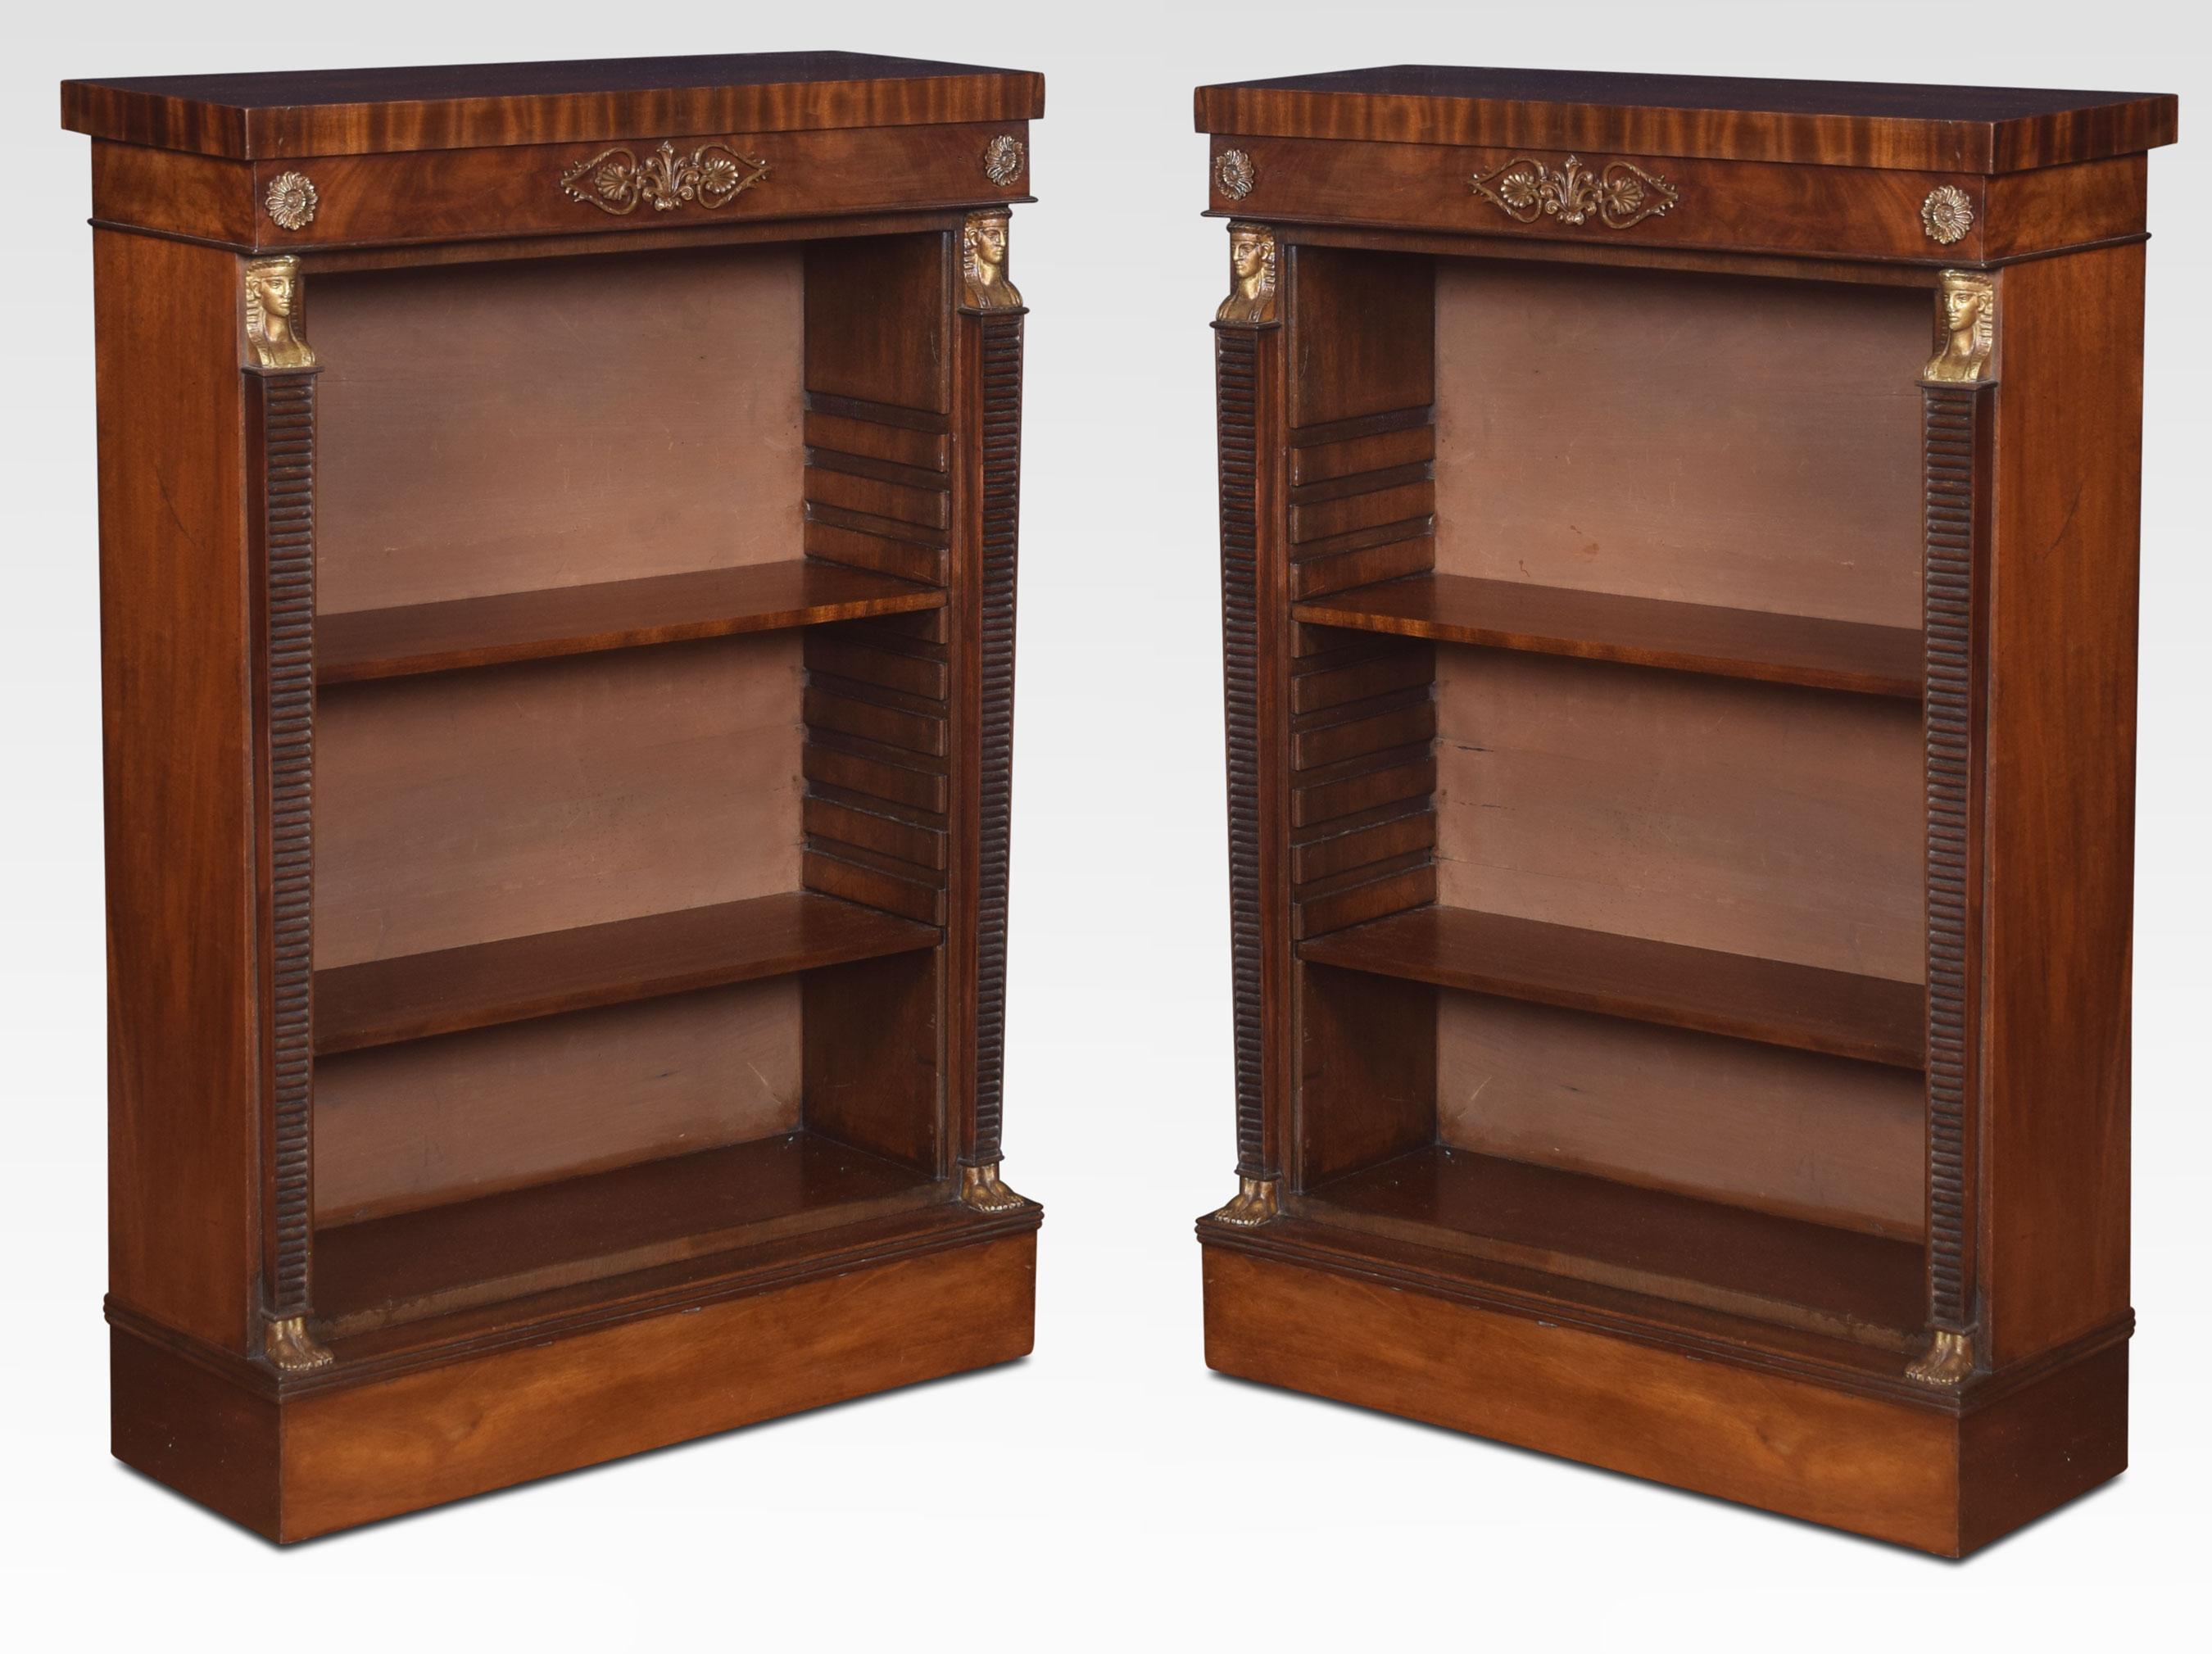 Regency Pair of Empire Style Bookcases